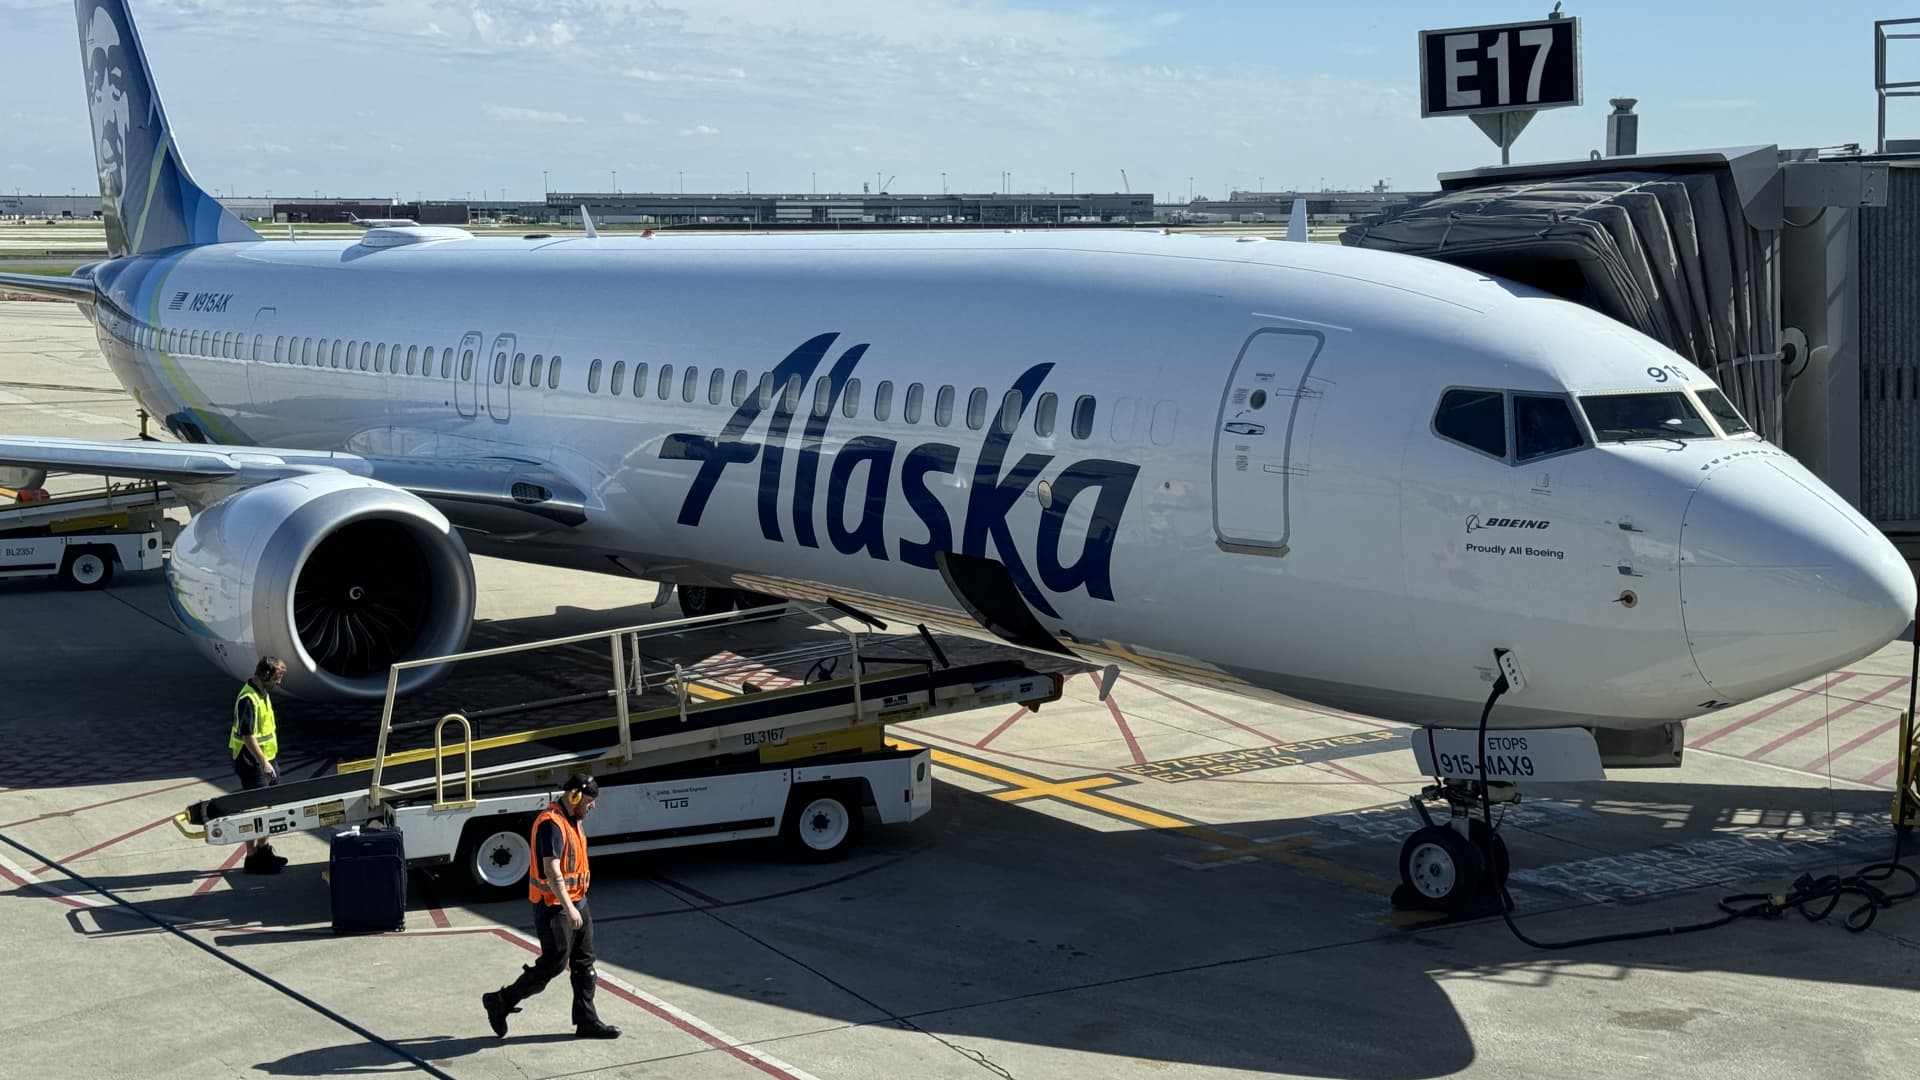 Alaska Airlines and flight attendants reach 'record' temporary employment agreement